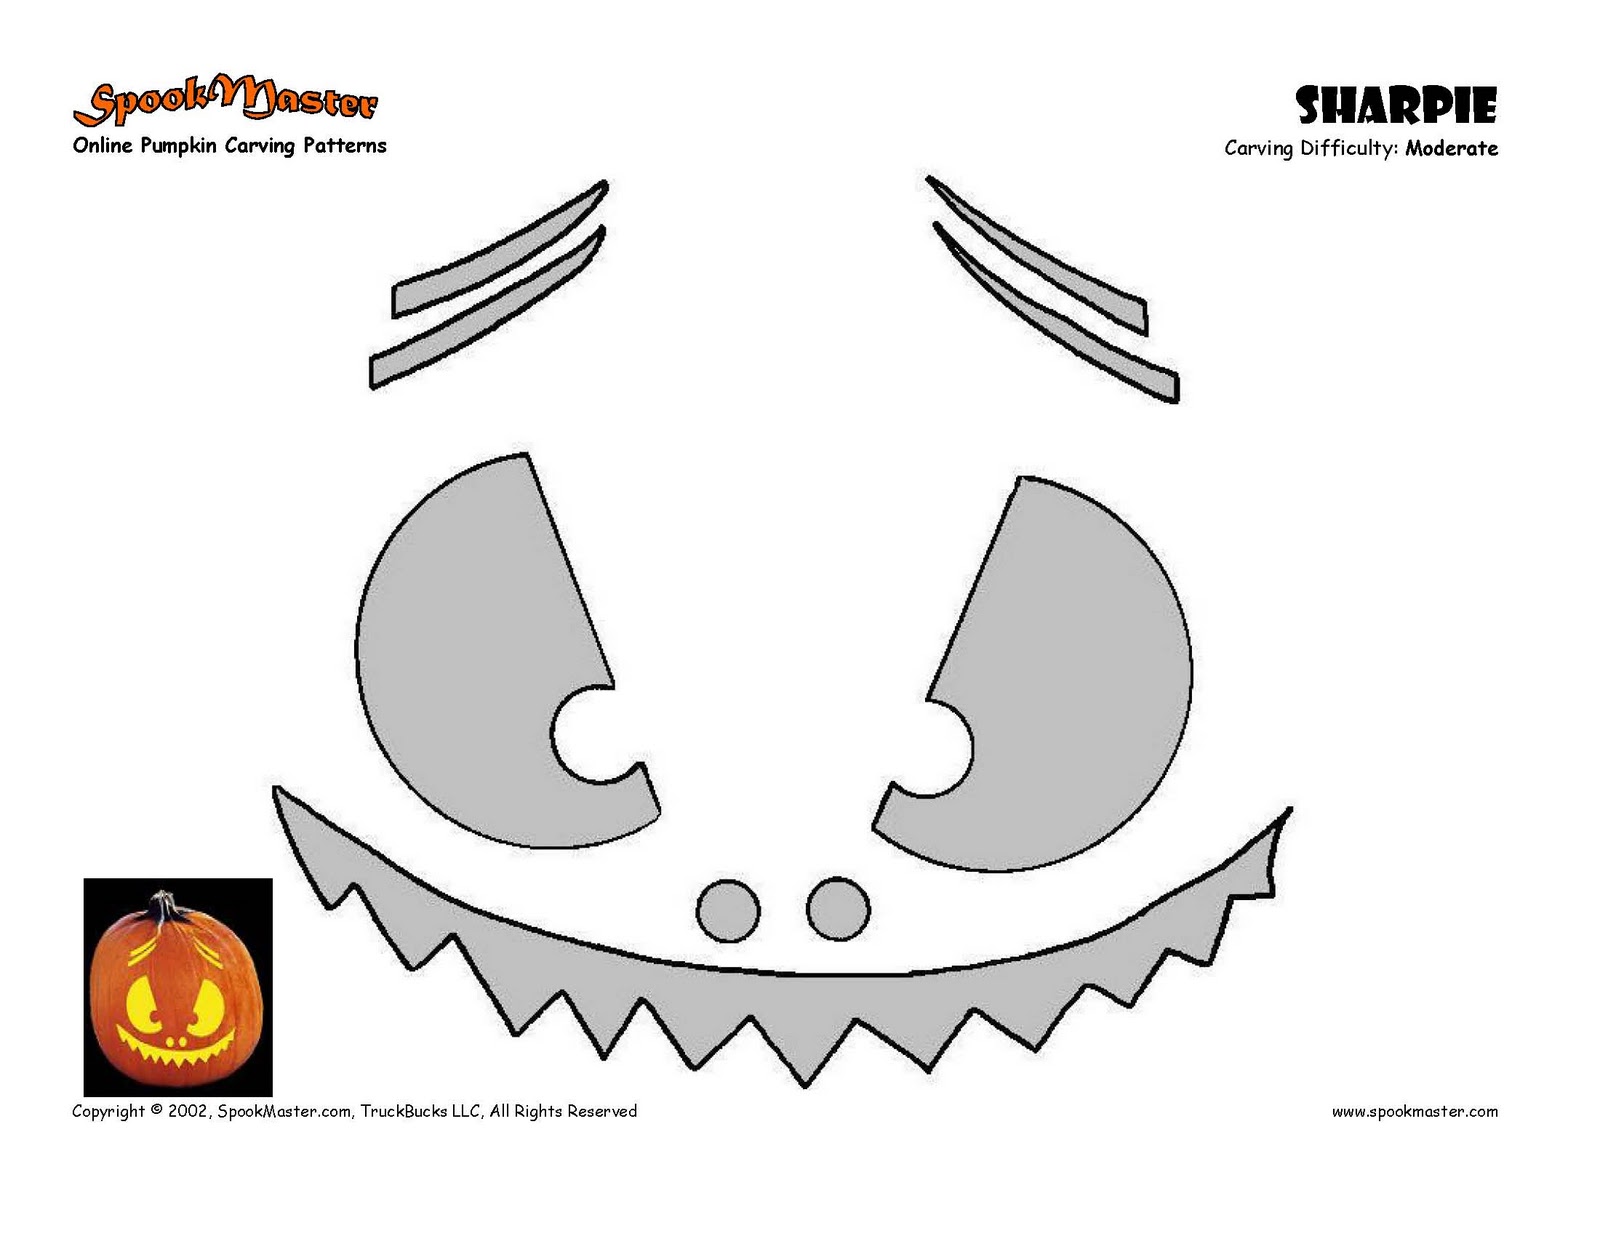 lonely-paper-designs-freebies-pumpkin-carving-templates